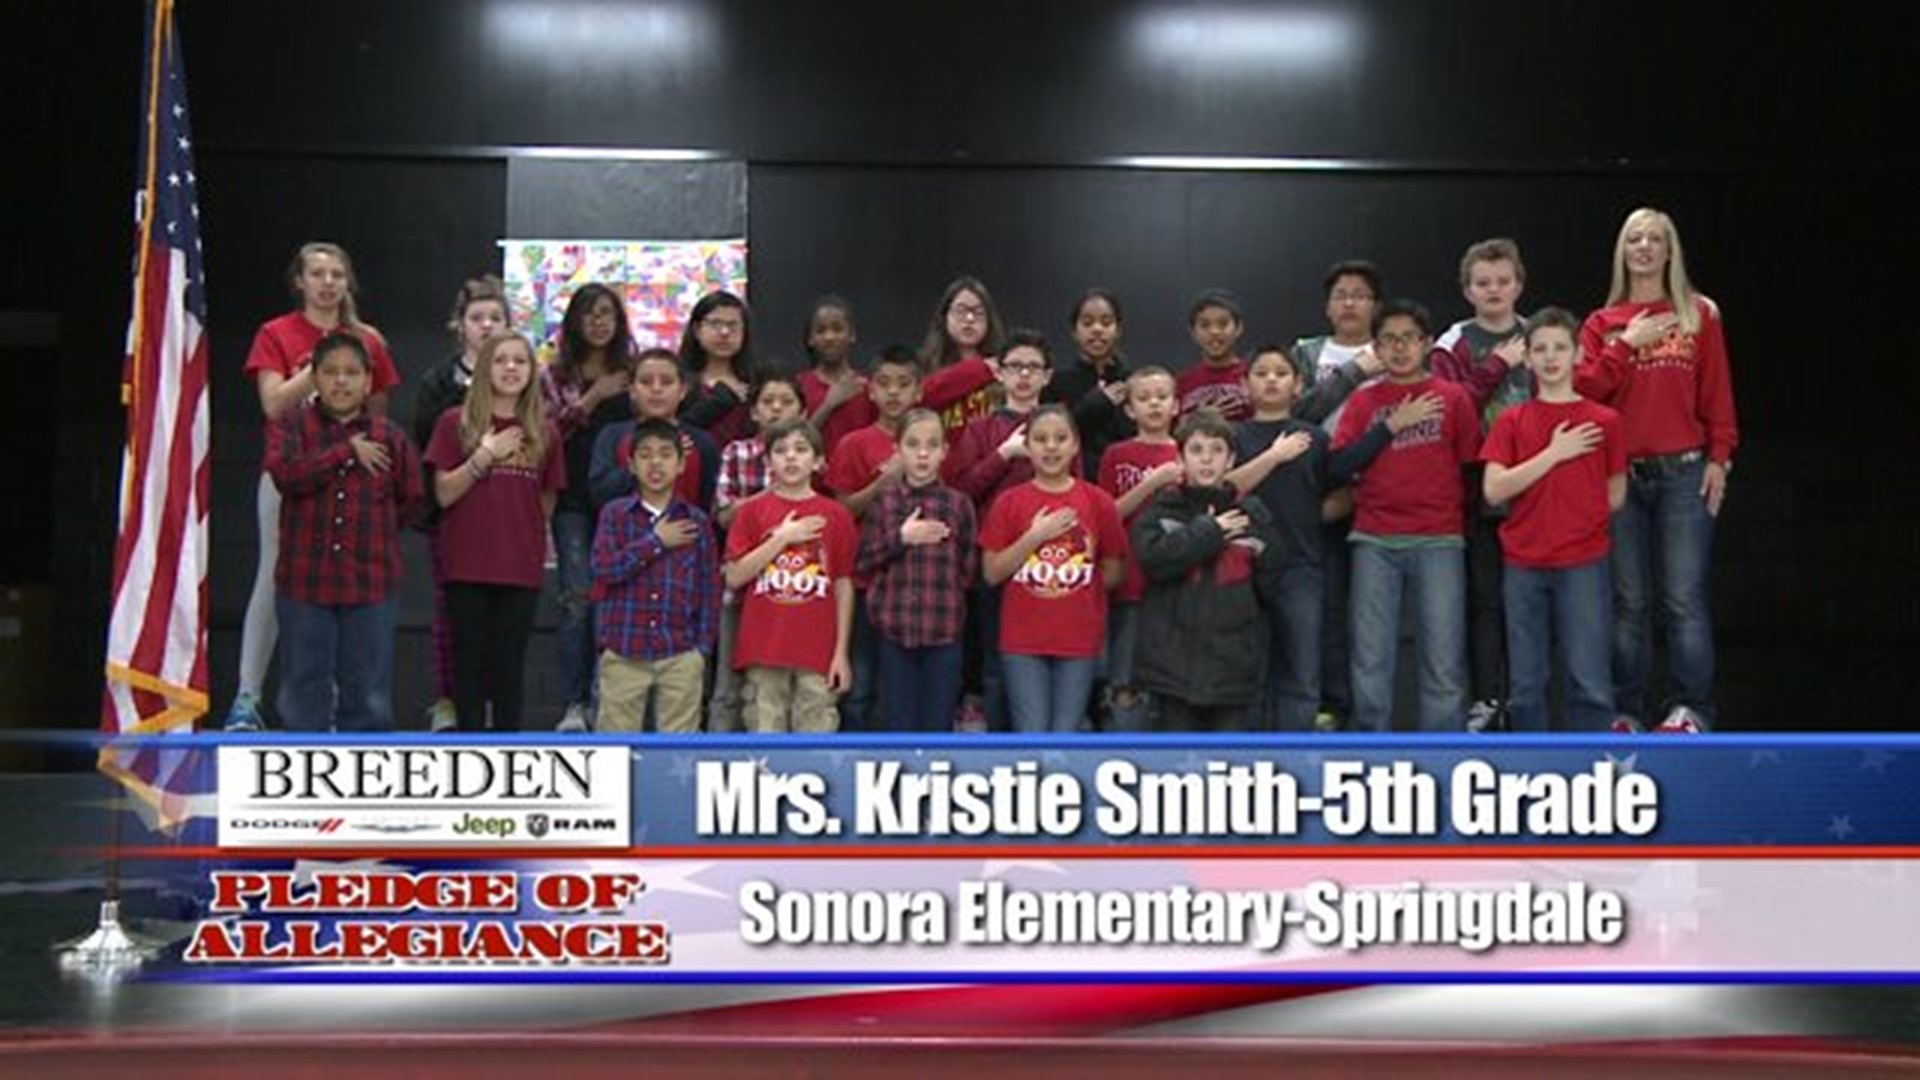 Sonora Elementary - Springdale, Mrs. Smith - Fifth Grade